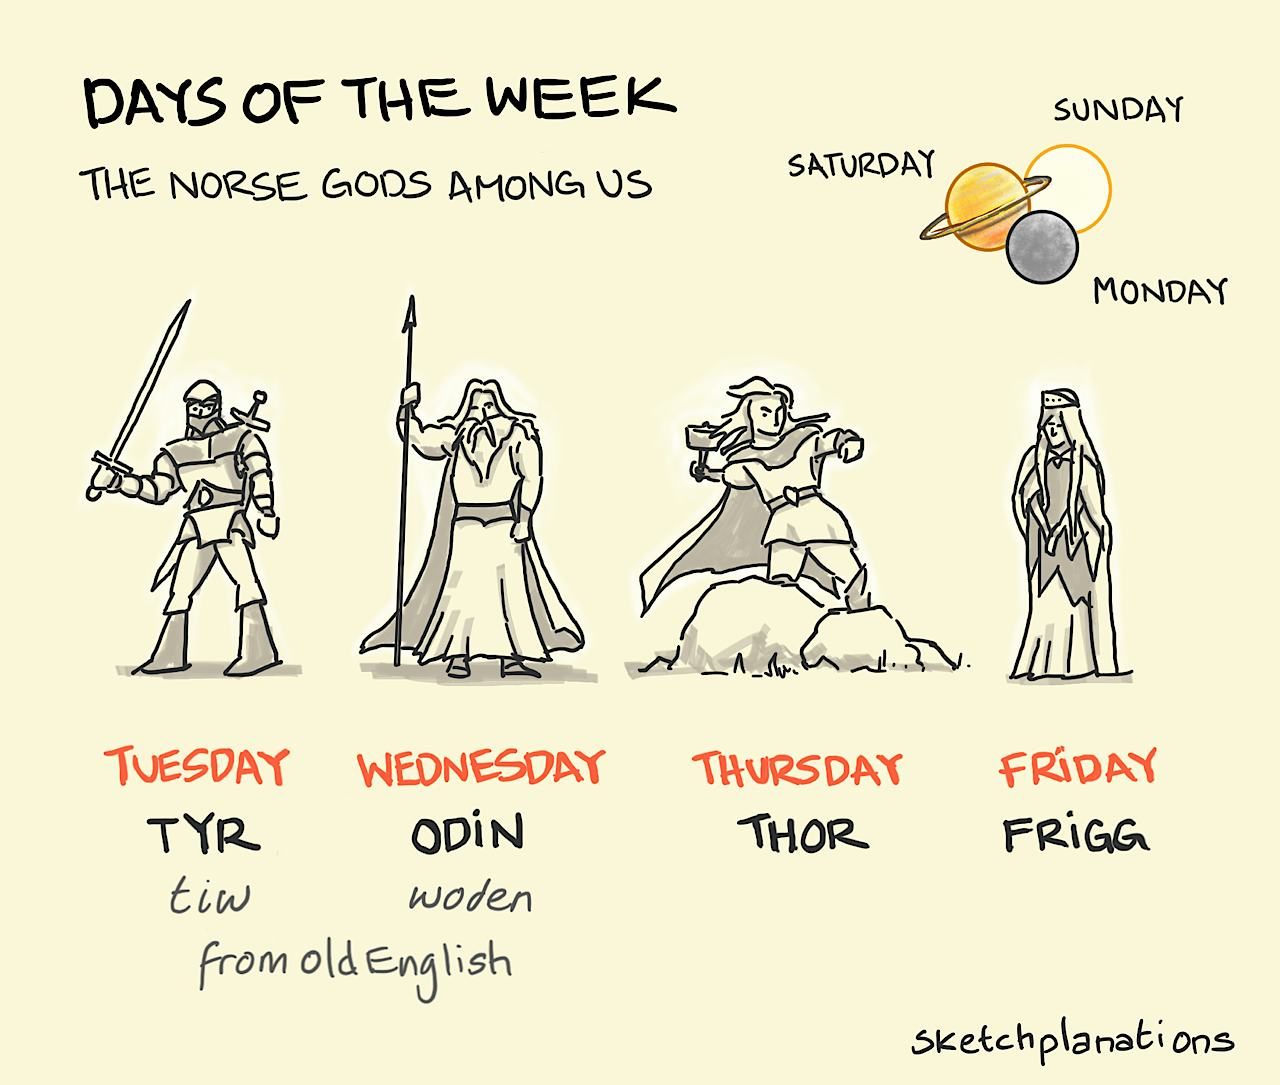 Days of the week and their Norse Gods: Tyr for Tuesday, Odin for Wednesday, Thor for Thursday and Frigg for Friday. And the Sun, Moon and Saturn for Sunday, Monday and Saturday.